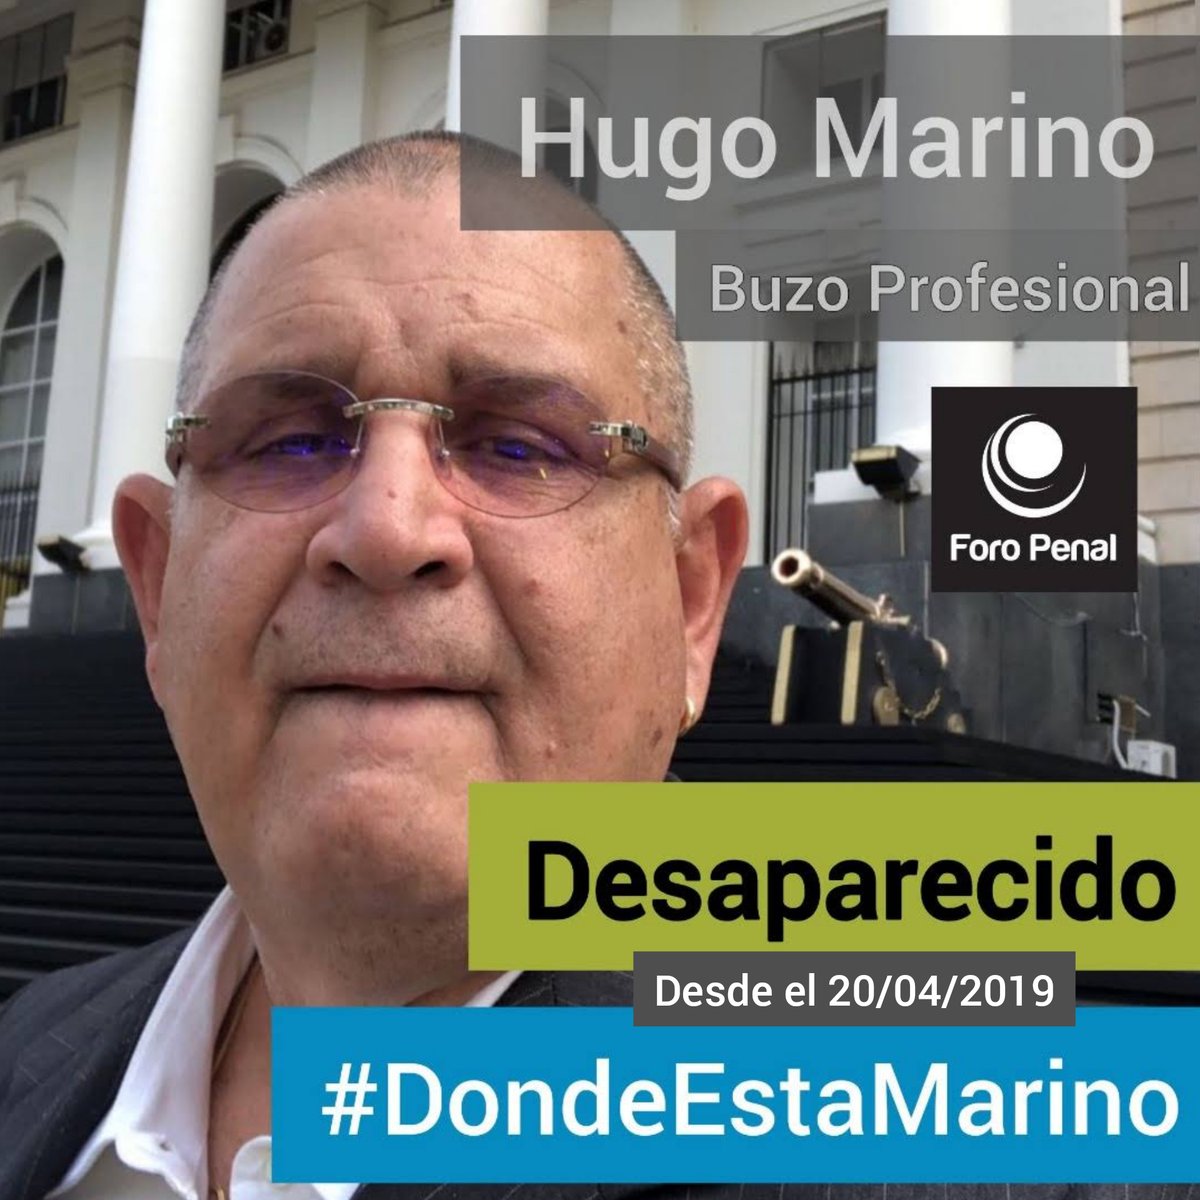 #HugoMarino has been missing for almost 10 months. On April 20, 2019, he was arrested by the #DGCIM (Military Counterintelligence)as he arrived in #Venezuela. His whereabouts remain unknown. Forcibly disappearing a person is a #HumanRightsViolation.
#ForcedDissaperances